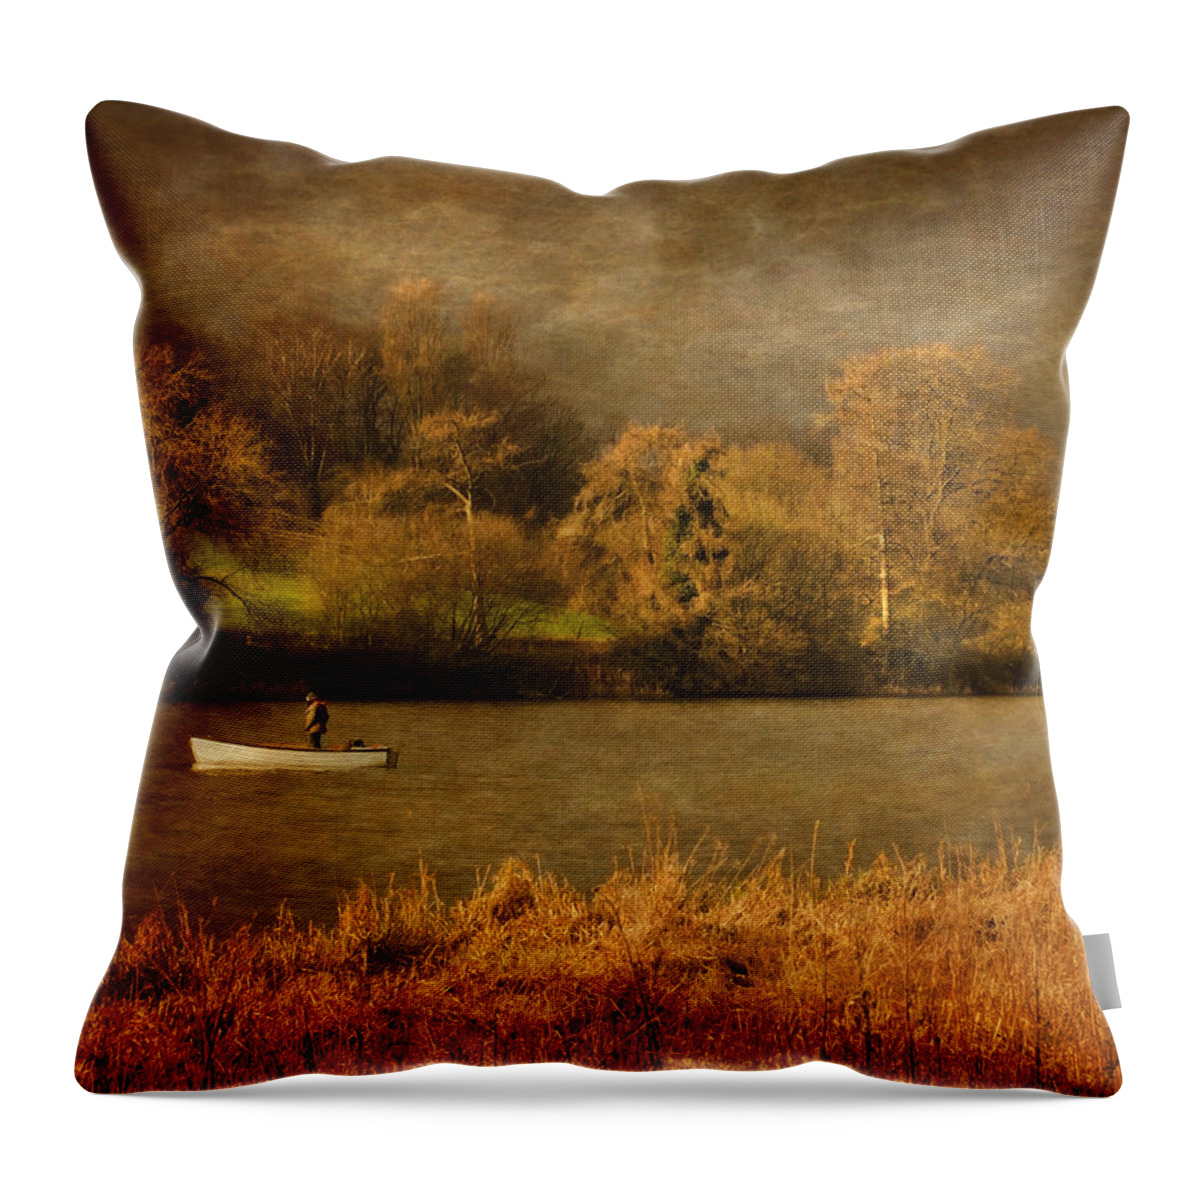 Fishing Throw Pillow featuring the photograph Fishing On Thornton Reservoir Leicestershire by Linsey Williams